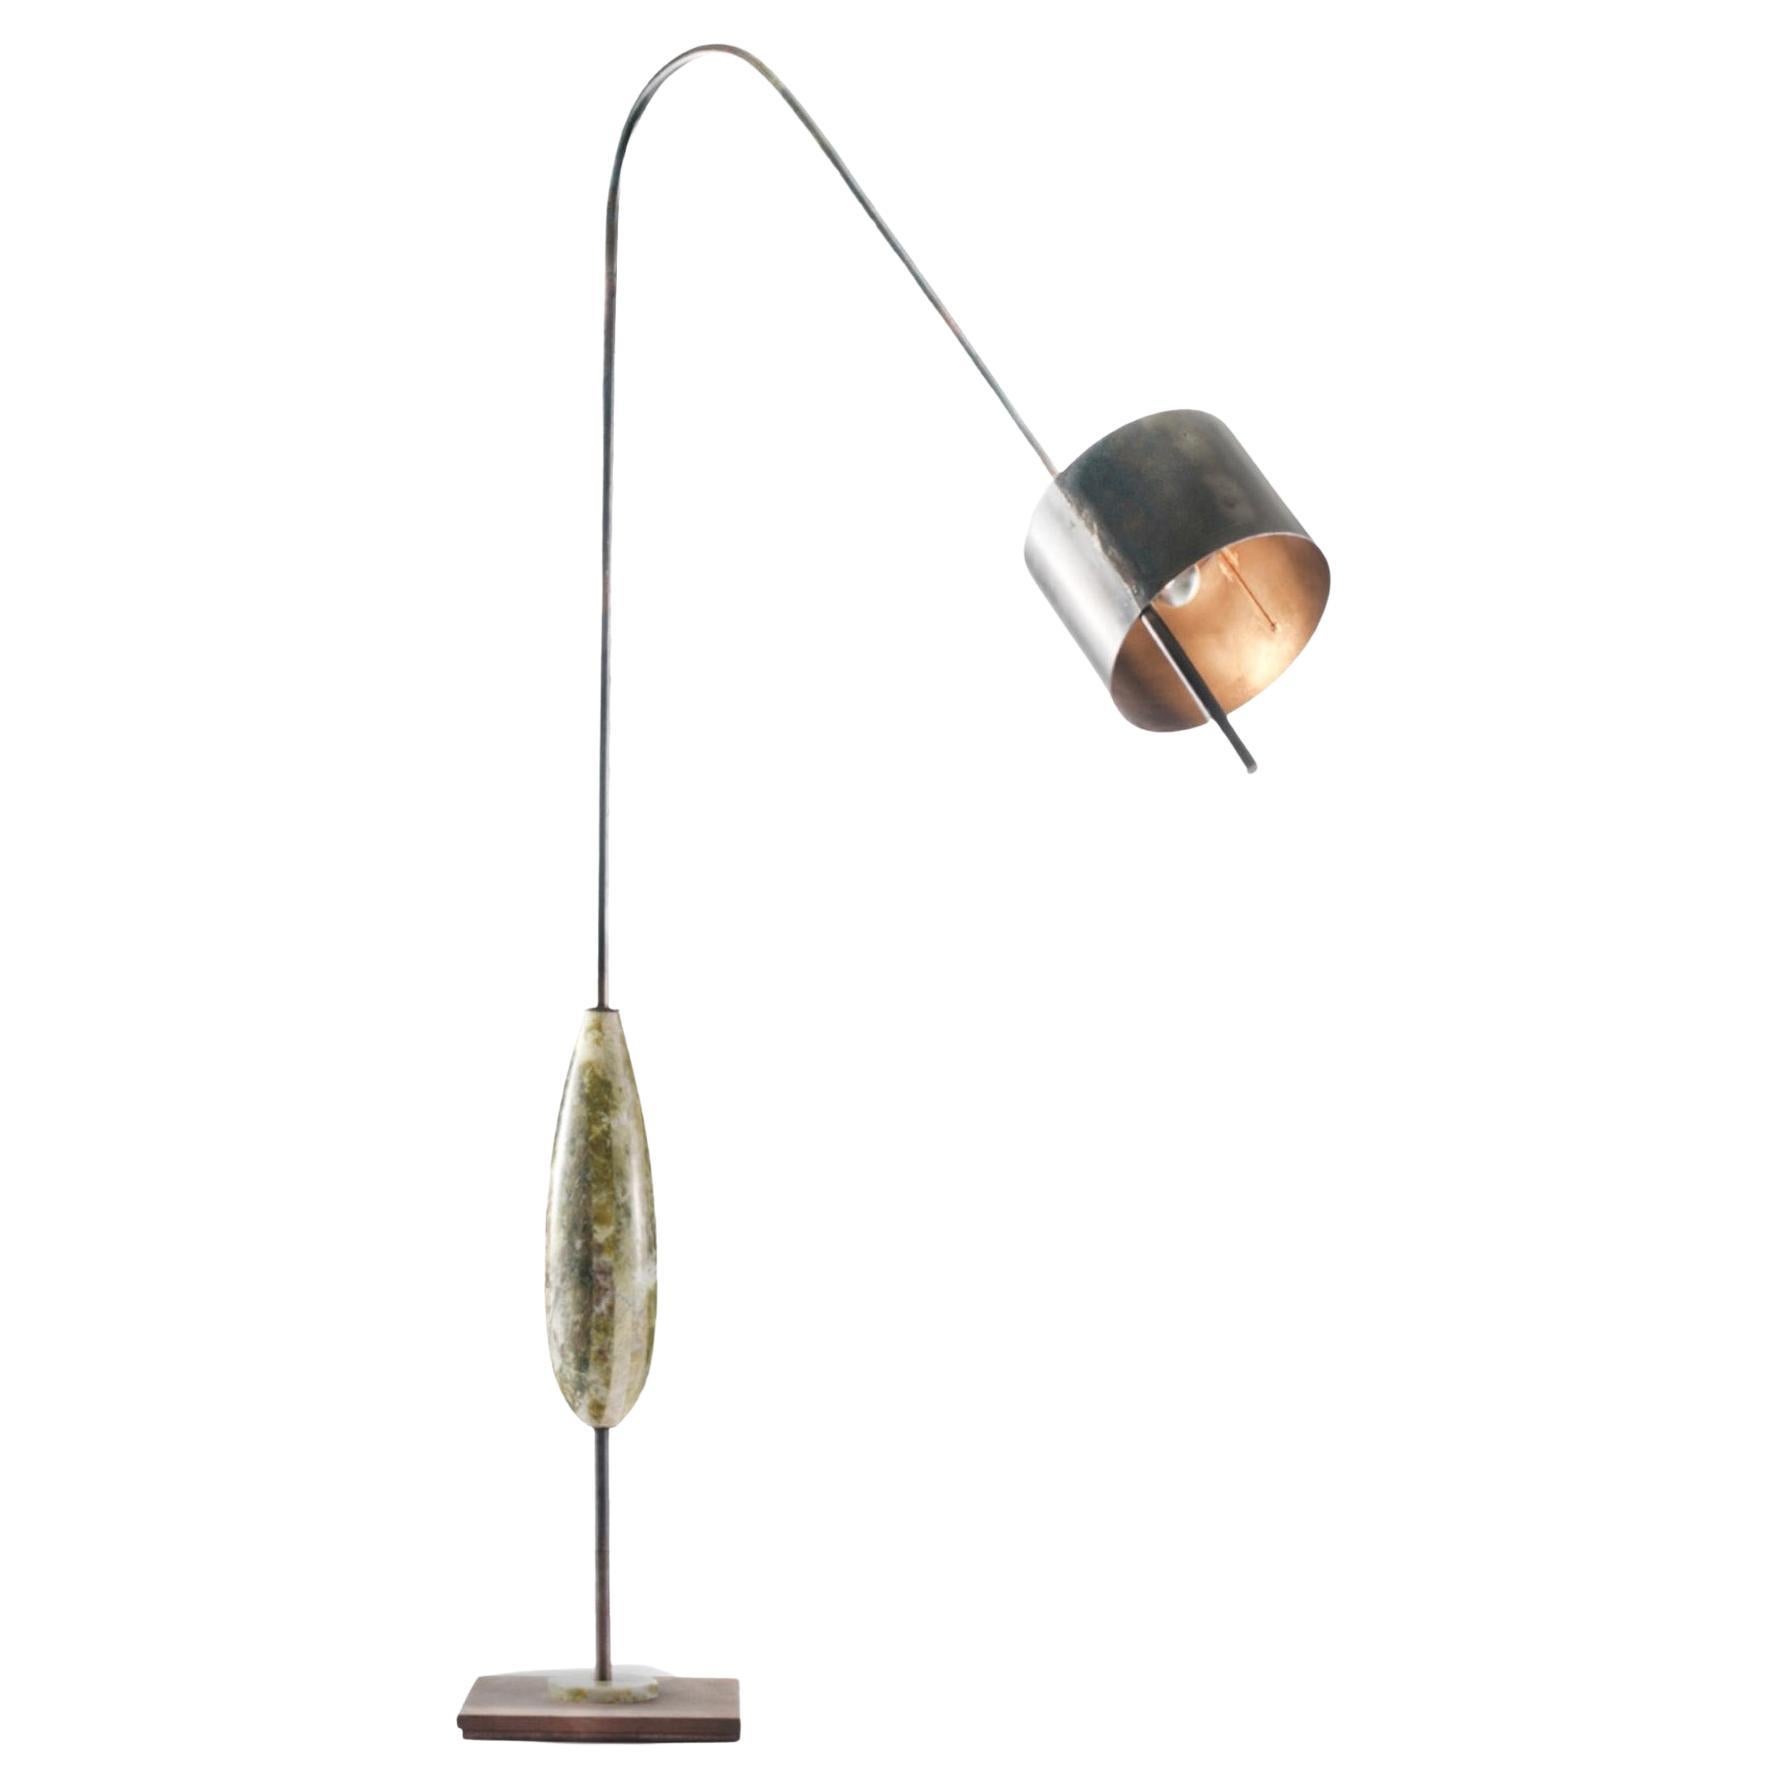 solo lamp collection - floor lamp by Sema Topaloglu